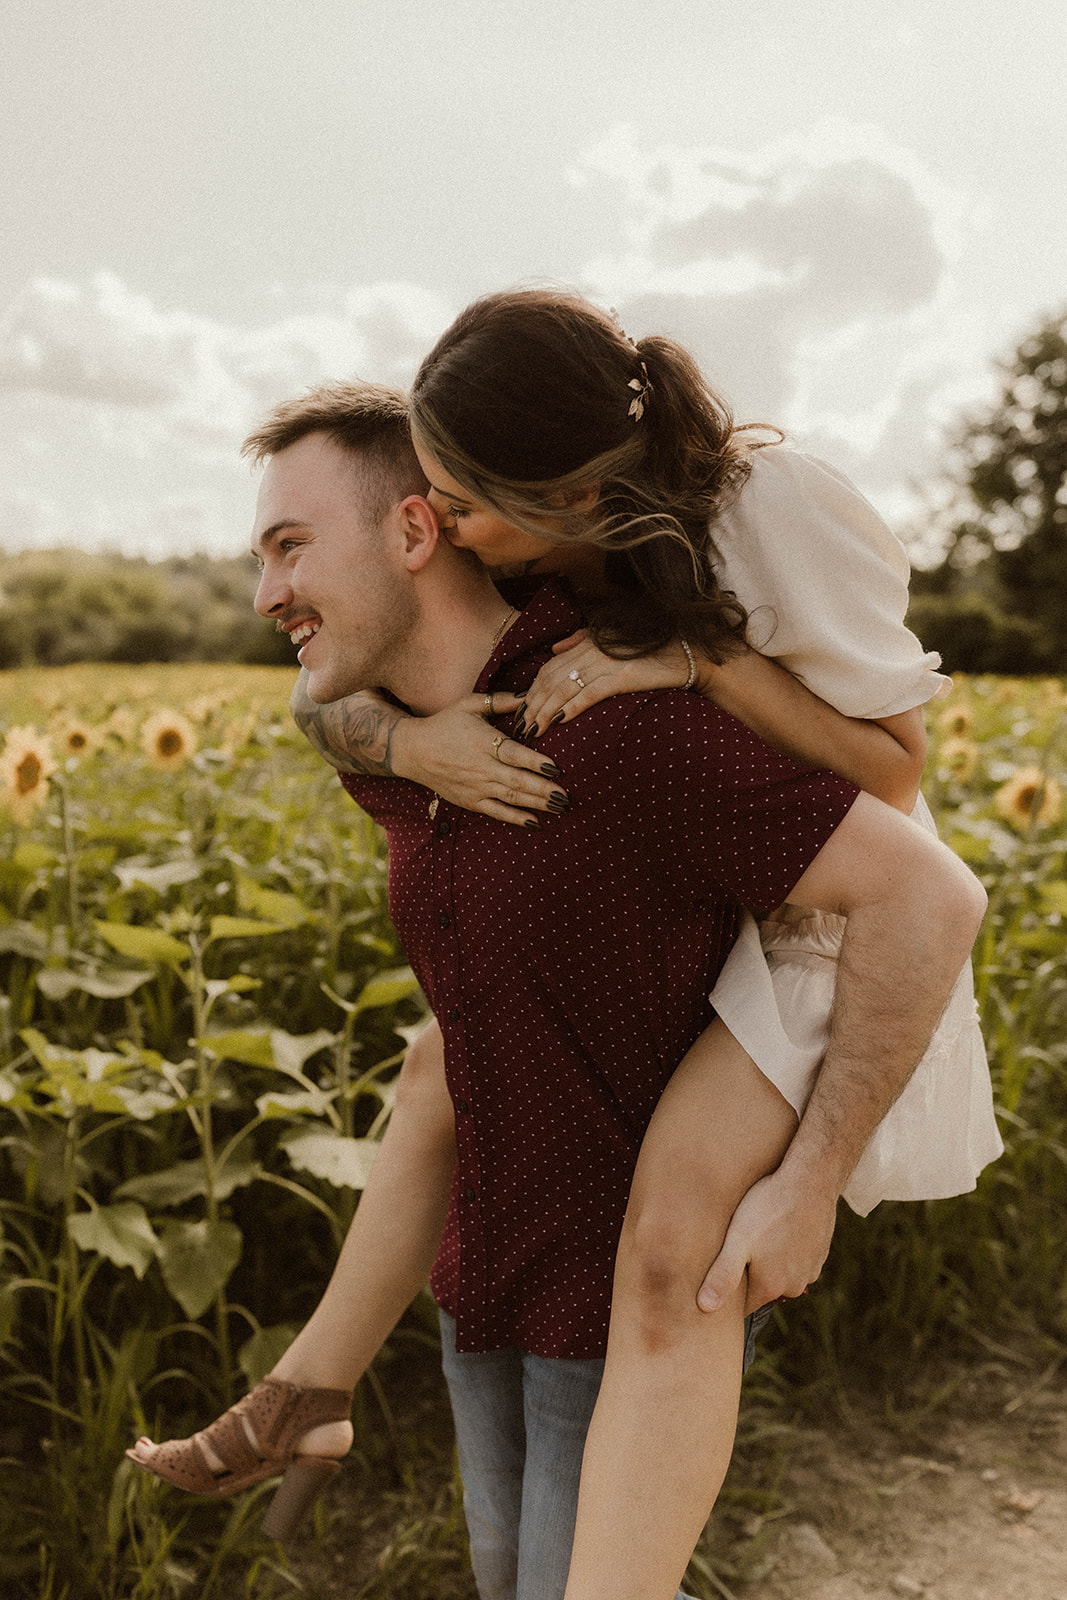 Man giving a lady a piggyback ride in a dreamy sunflower field.